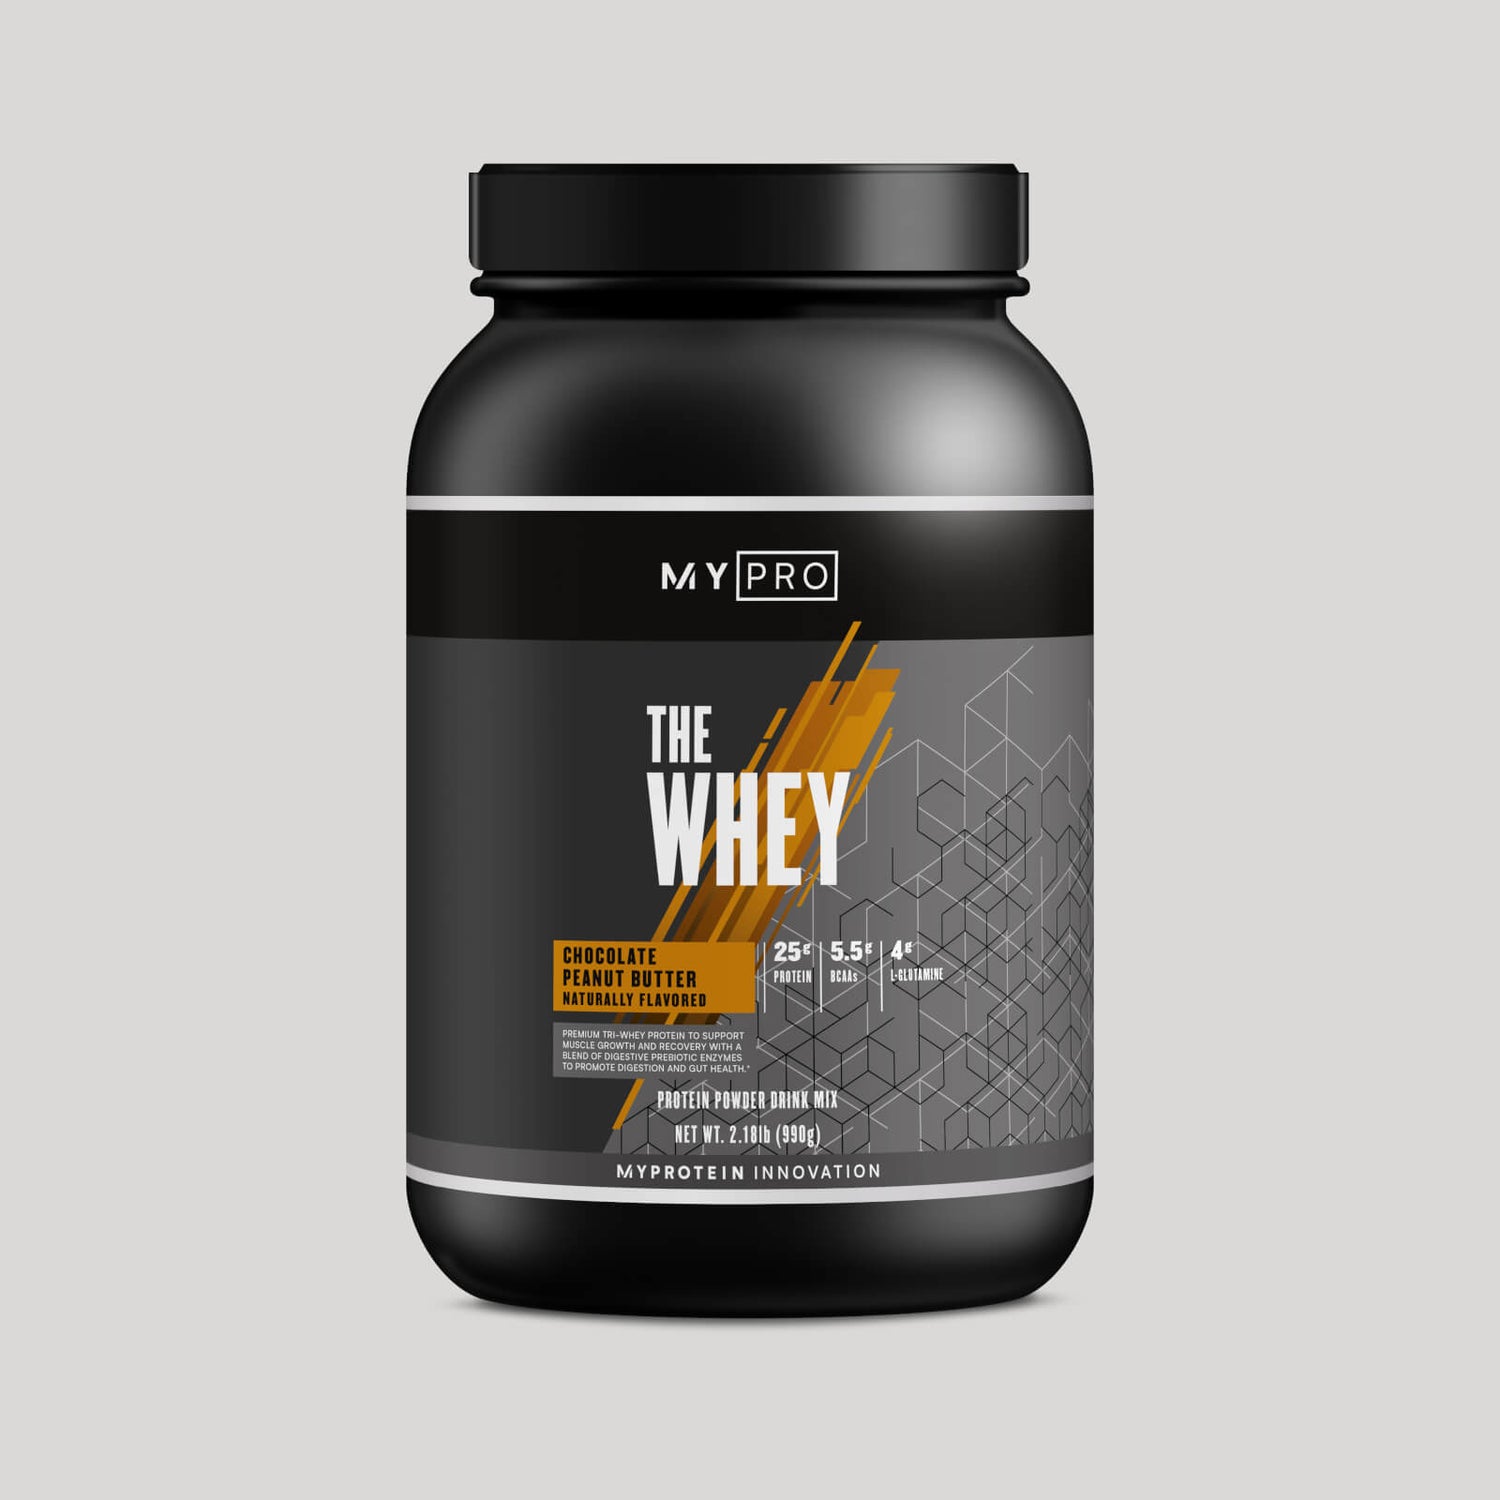 THE Whey (NSF) - 30servings - Chocolate Peanut Butter